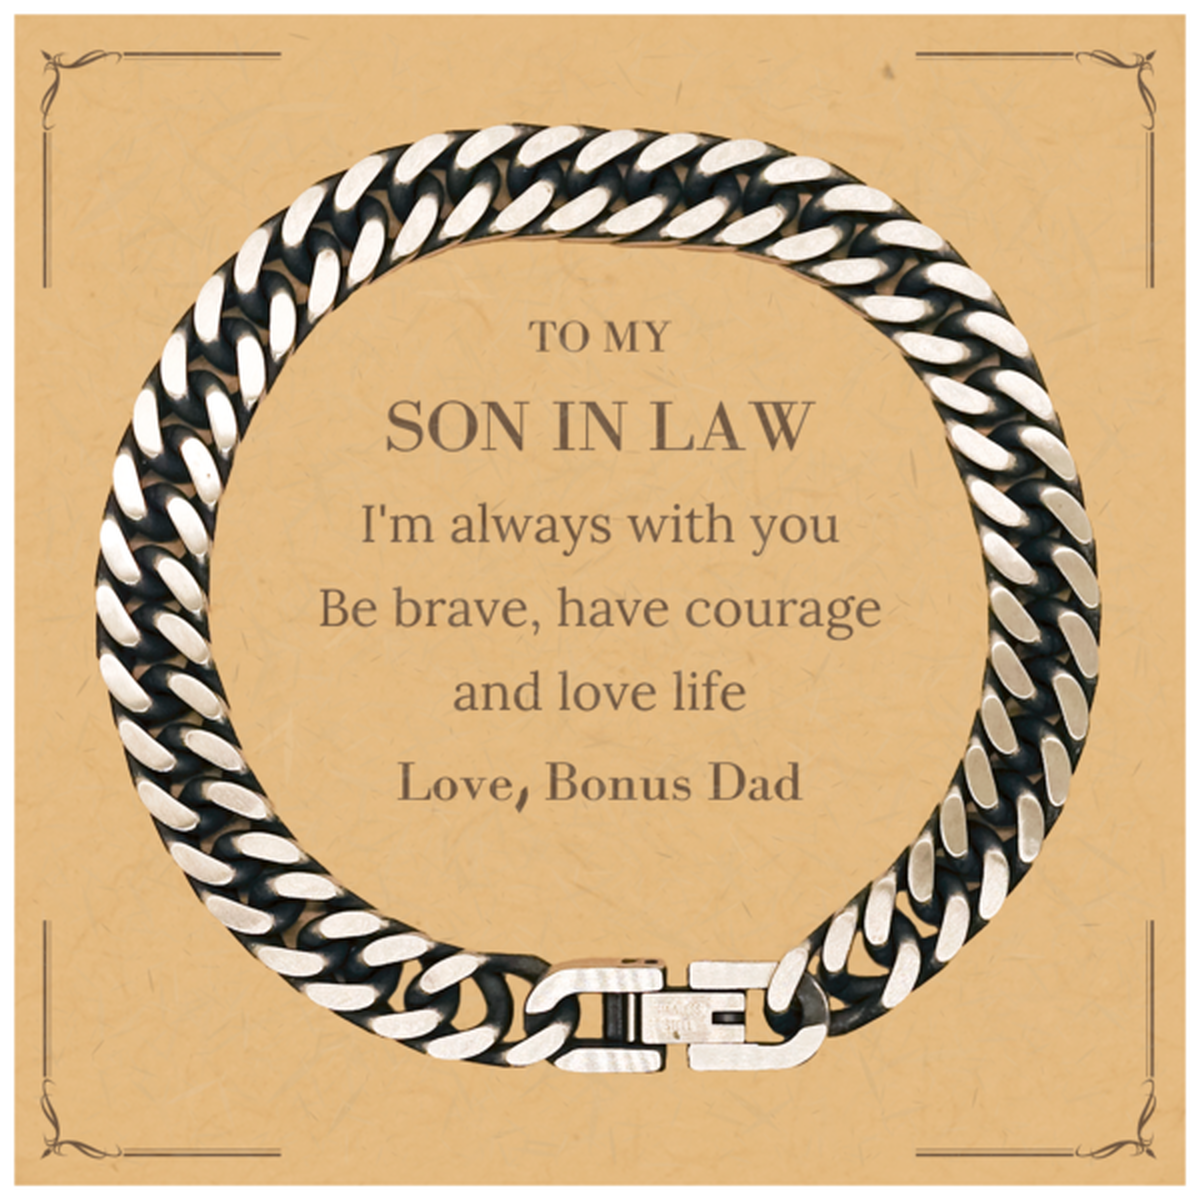 To My Son In Law Gifts from Bonus Dad, Unique Cuban Link Chain Bracelet Inspirational Christmas Birthday Graduation Gifts for Son In Law I'm always with you. Be brave, have courage and love life. Love, Bonus Dad